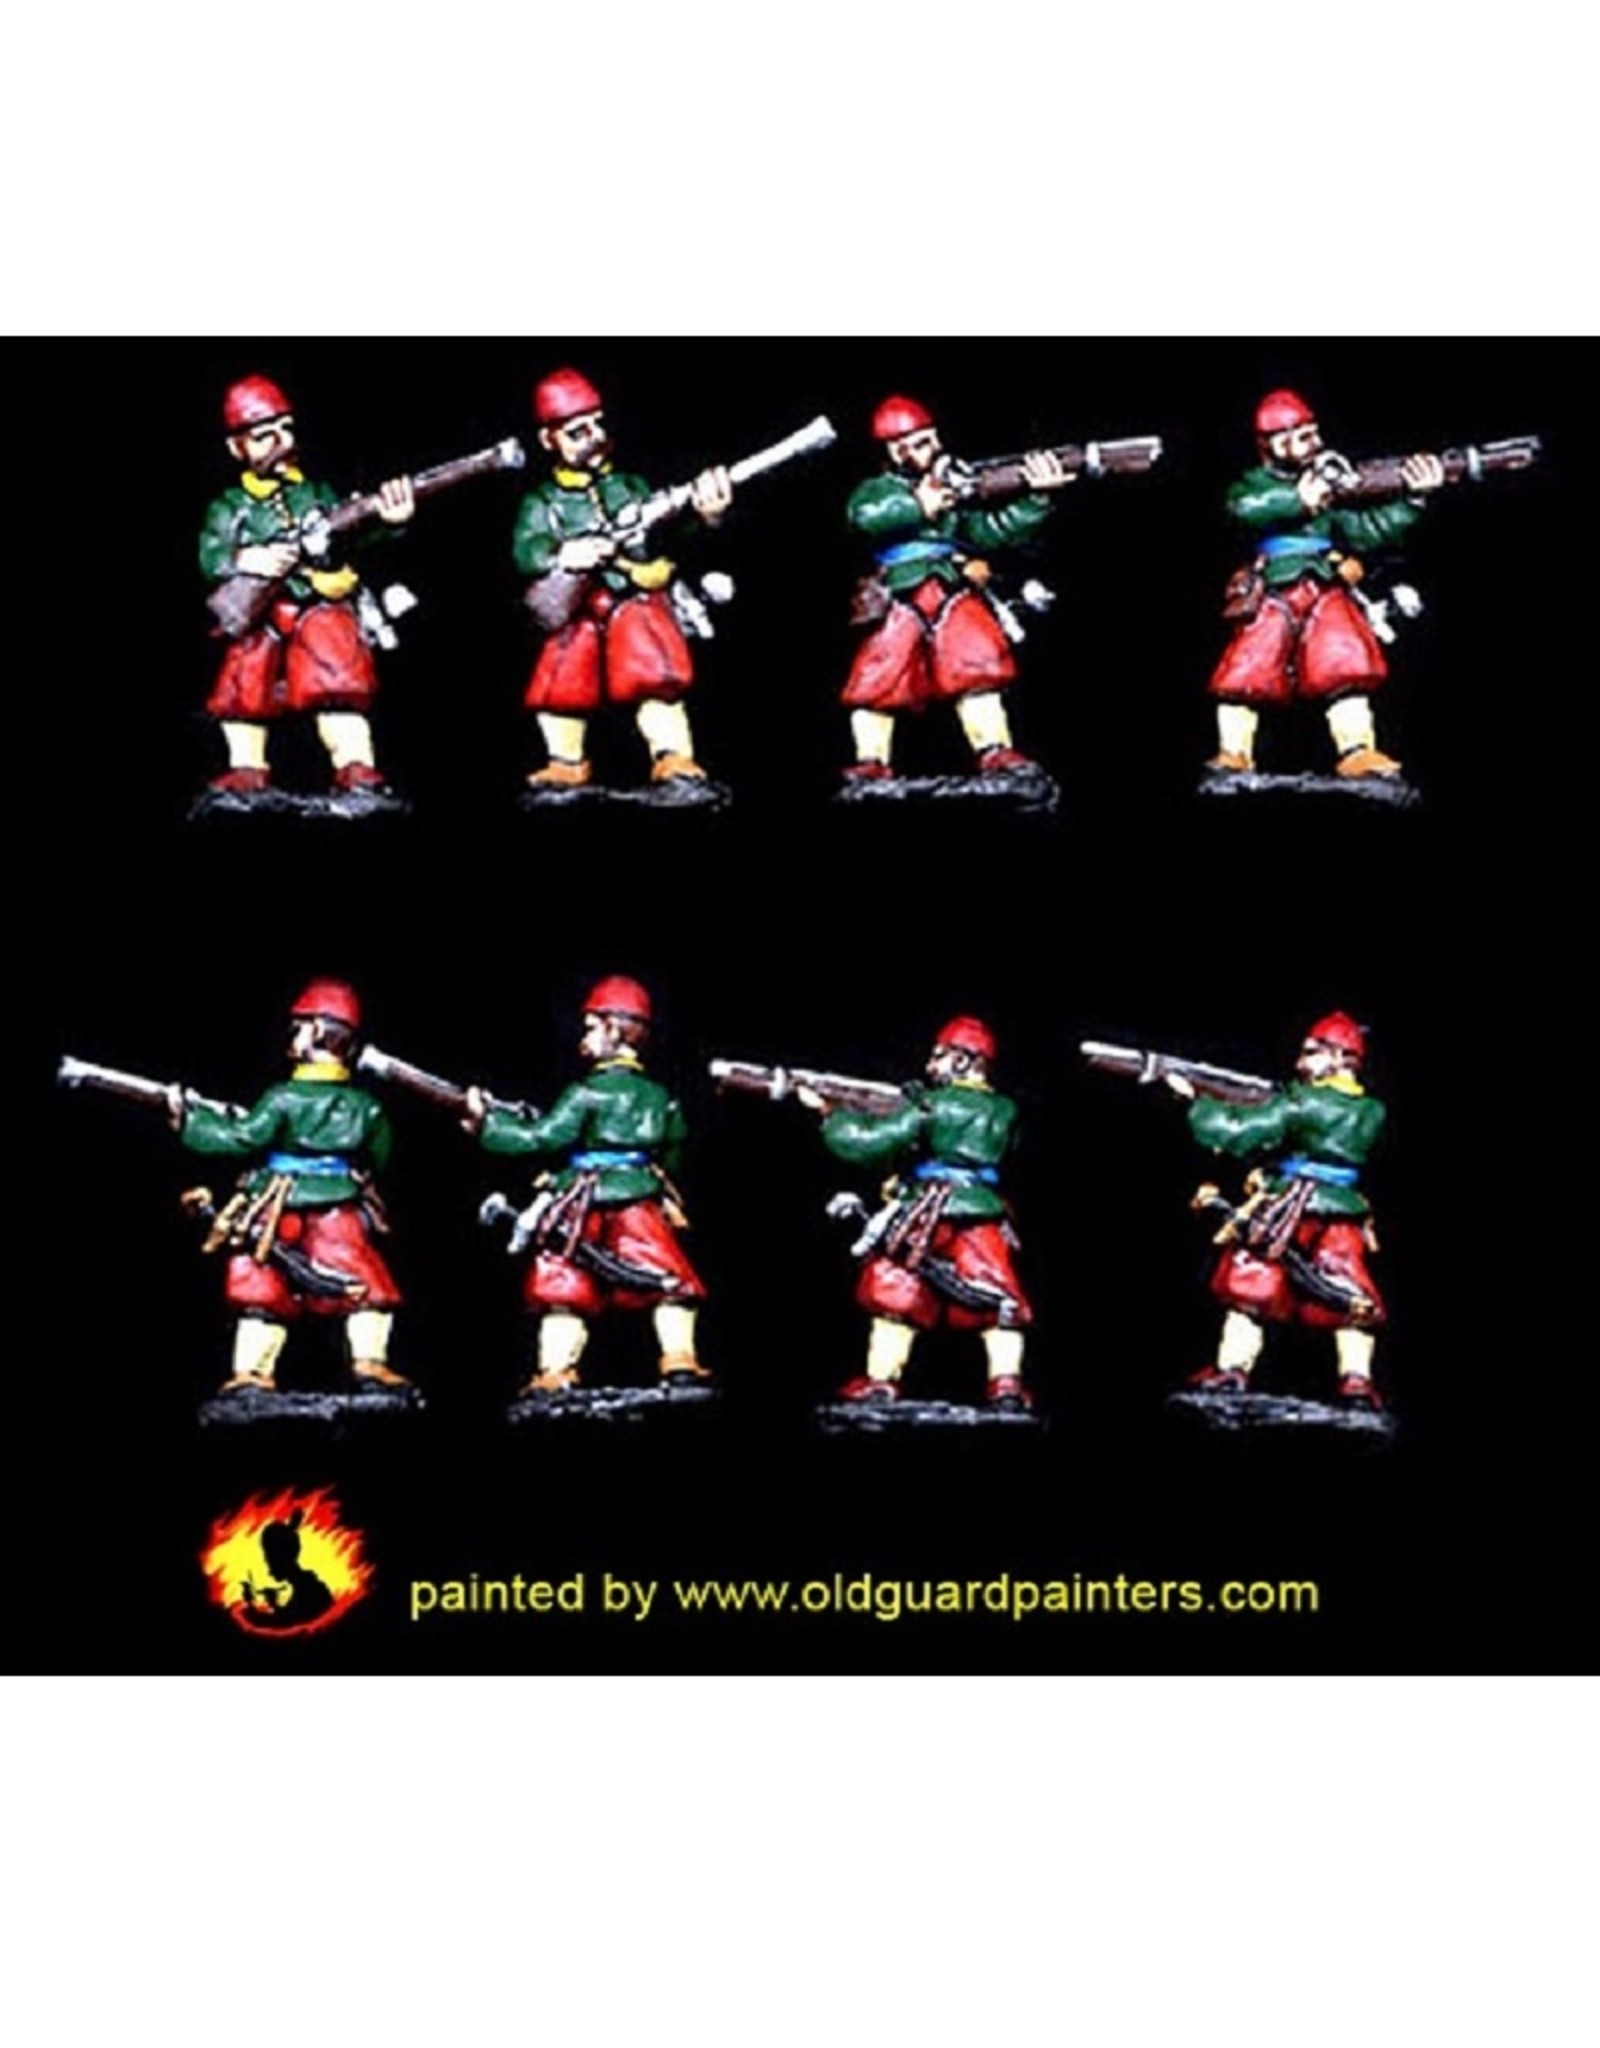 Venexia OT23 - Janissaries with muskets (campaign dress)